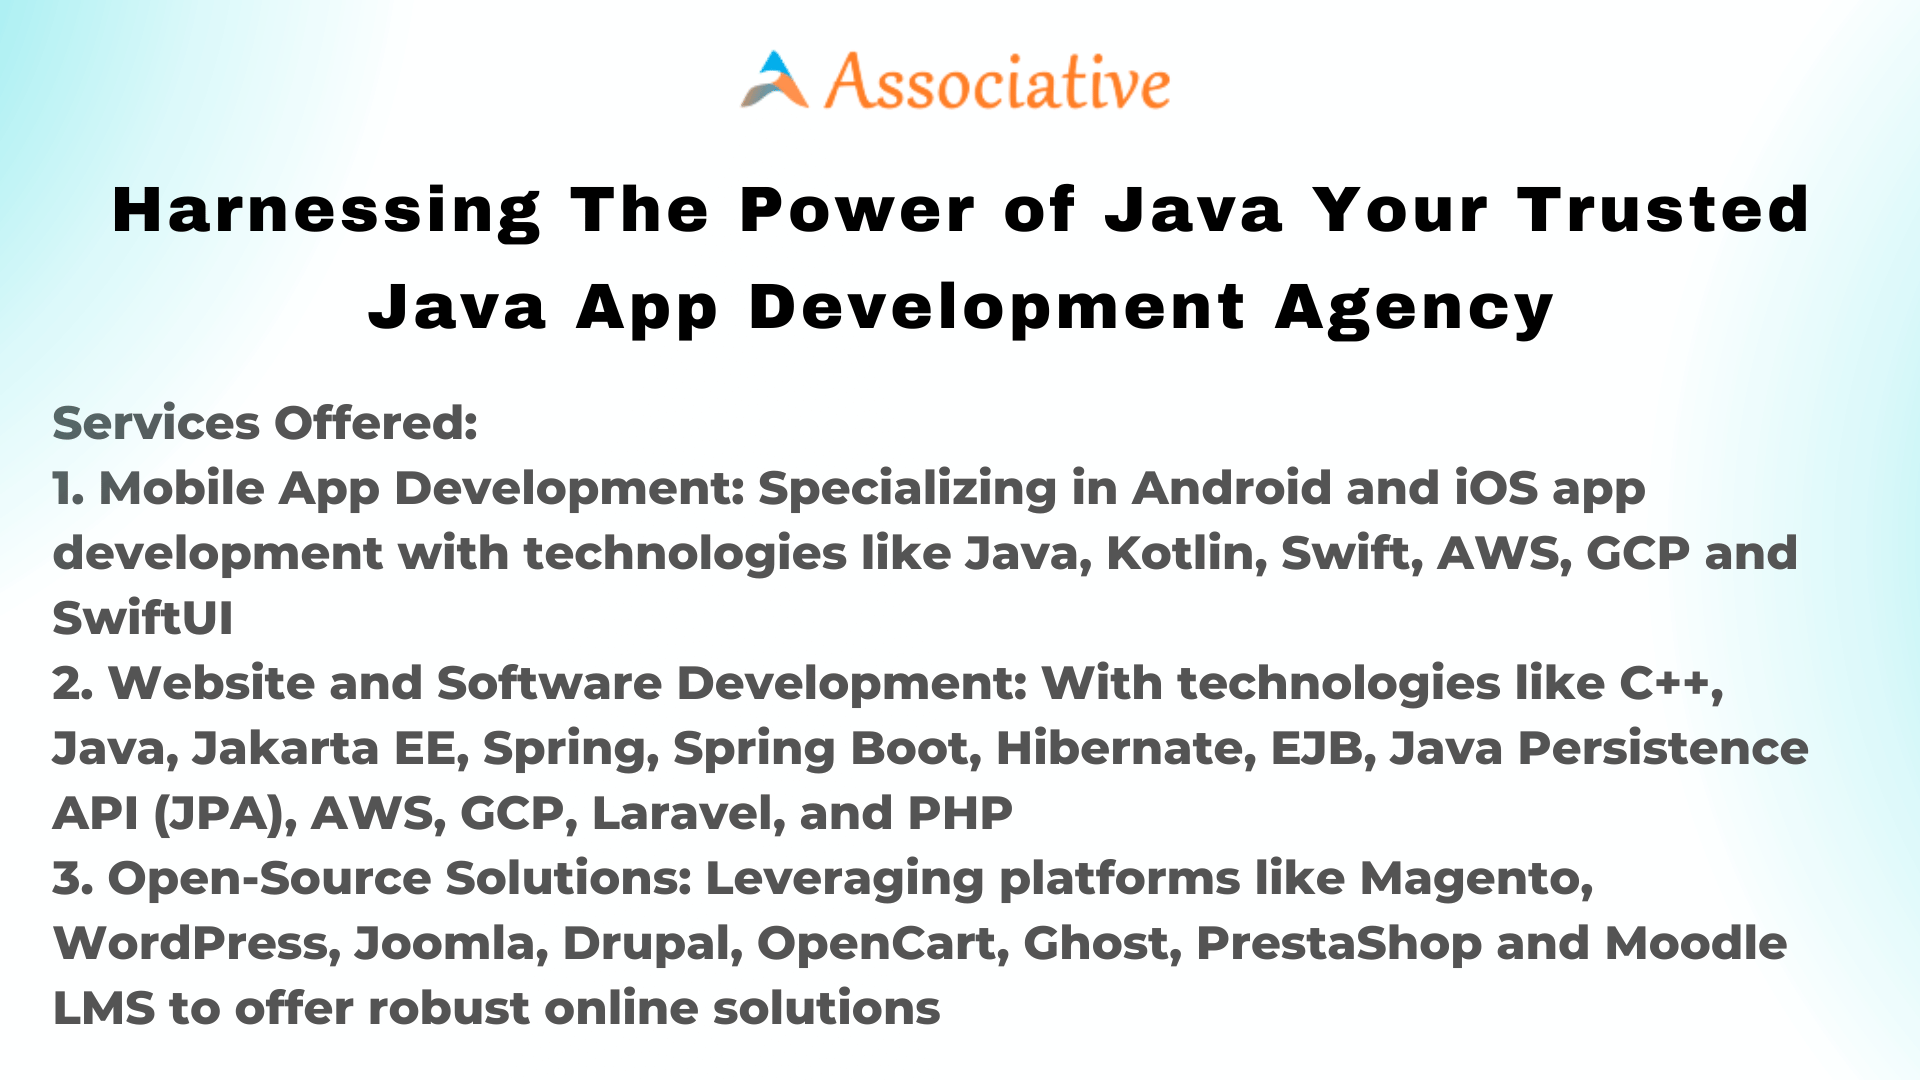 Harnessing the Power of Java Your Trusted Java App Development Agency